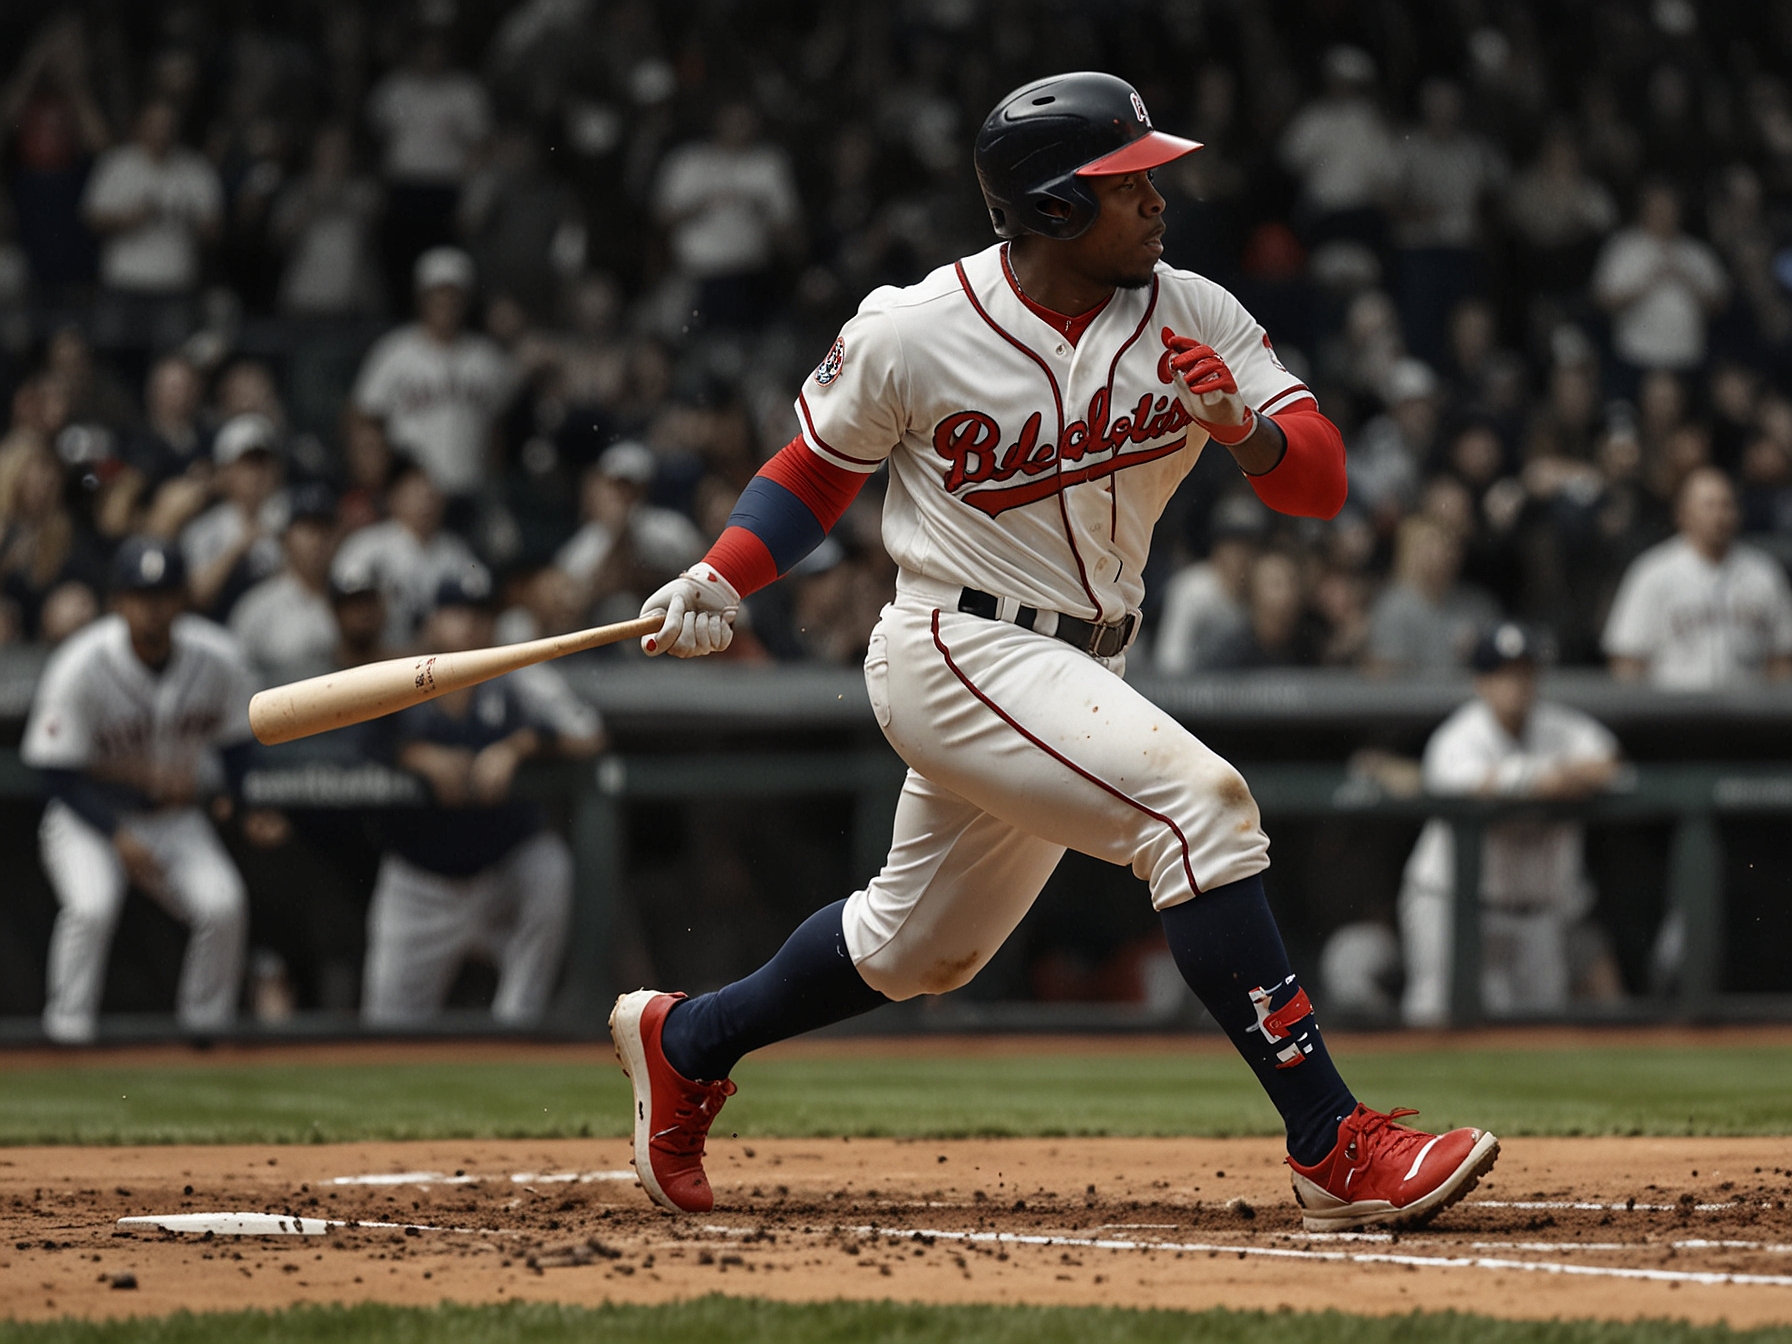 A dynamic shot of Ozzie Albies hitting the game-winning home run in the eighth inning against the Detroit Tigers.